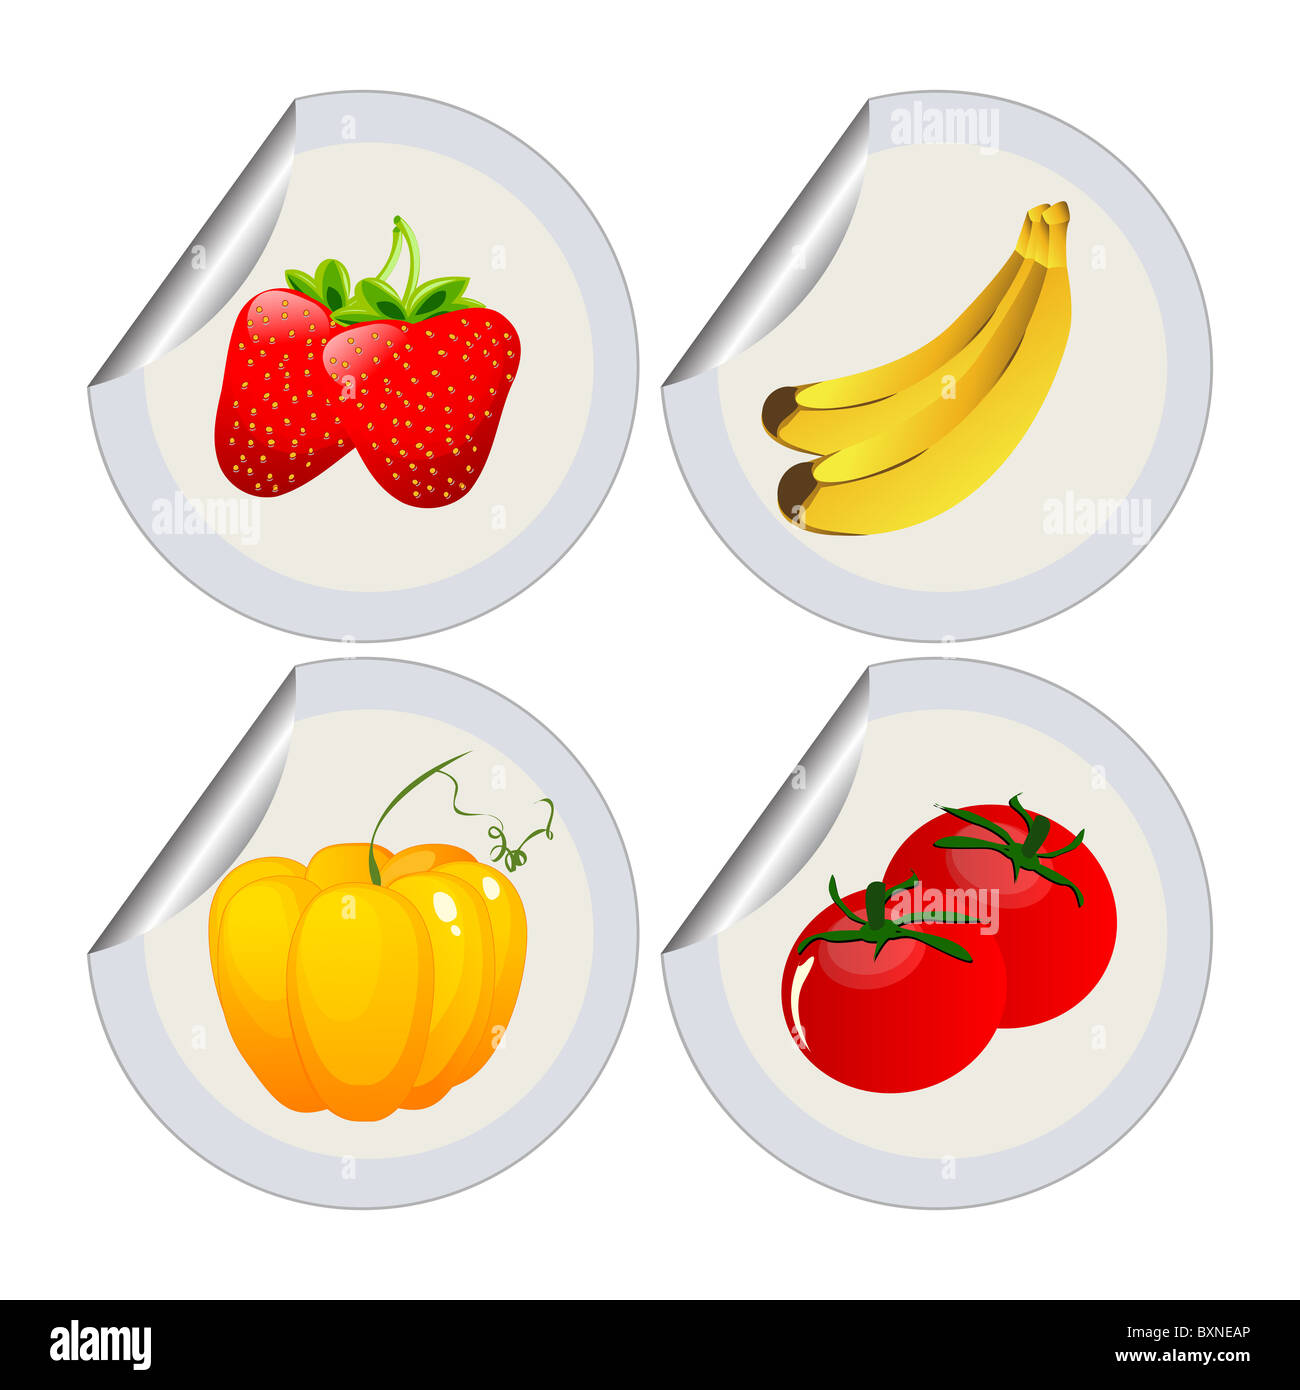 Fruits and vegetables Stock Photo